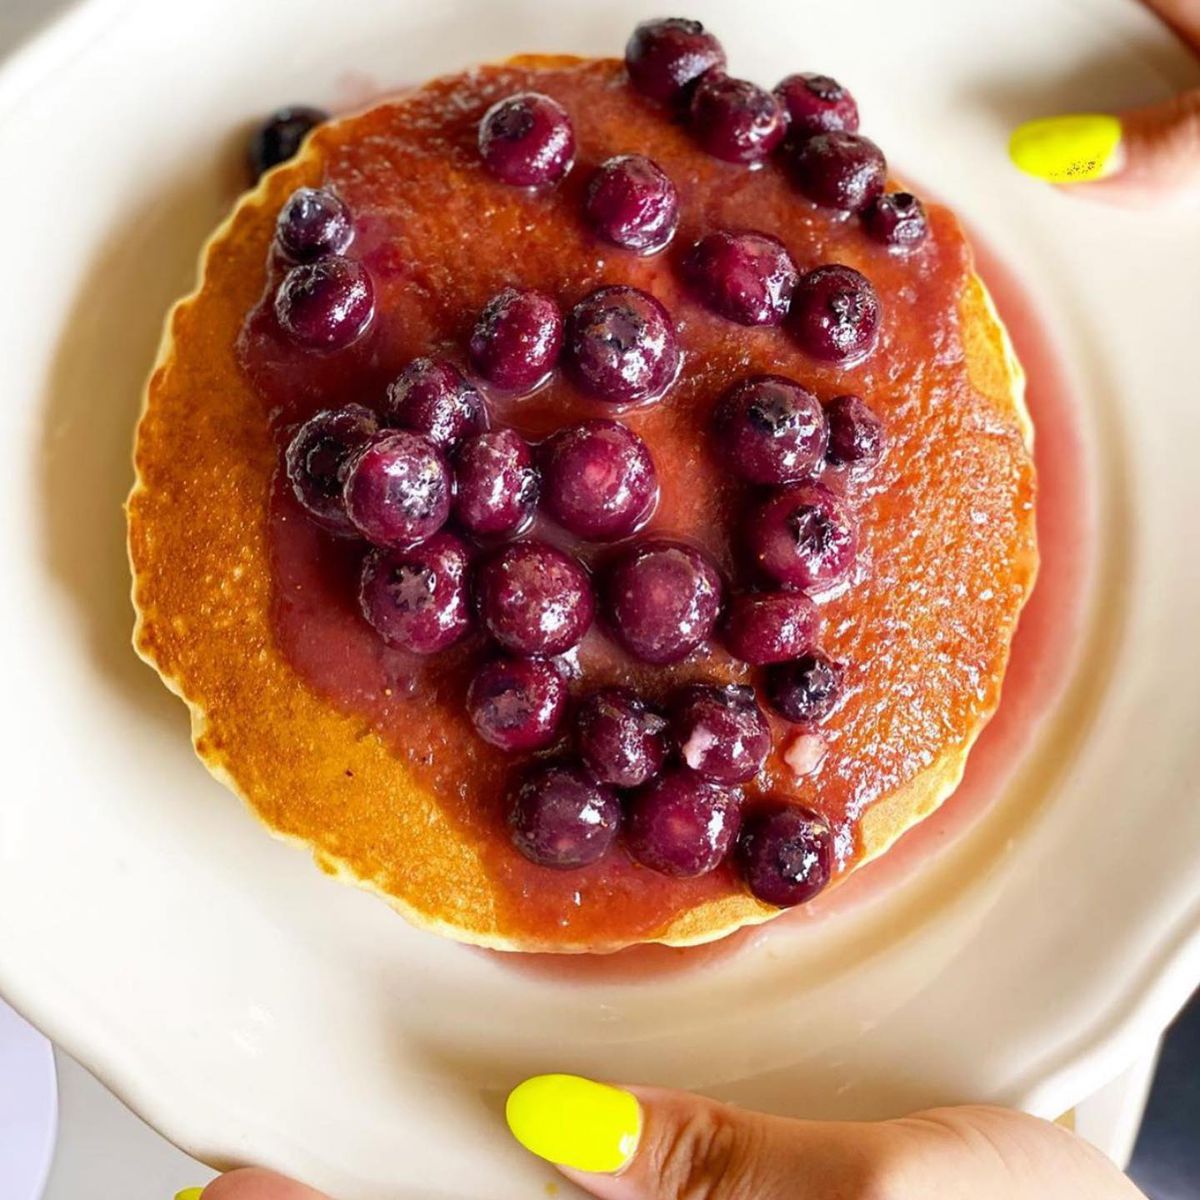 Two hands with a bright yellow manicure holds a white plate with a toasty colored pancake drenched in macerated cherries and a dark, sticky syrup